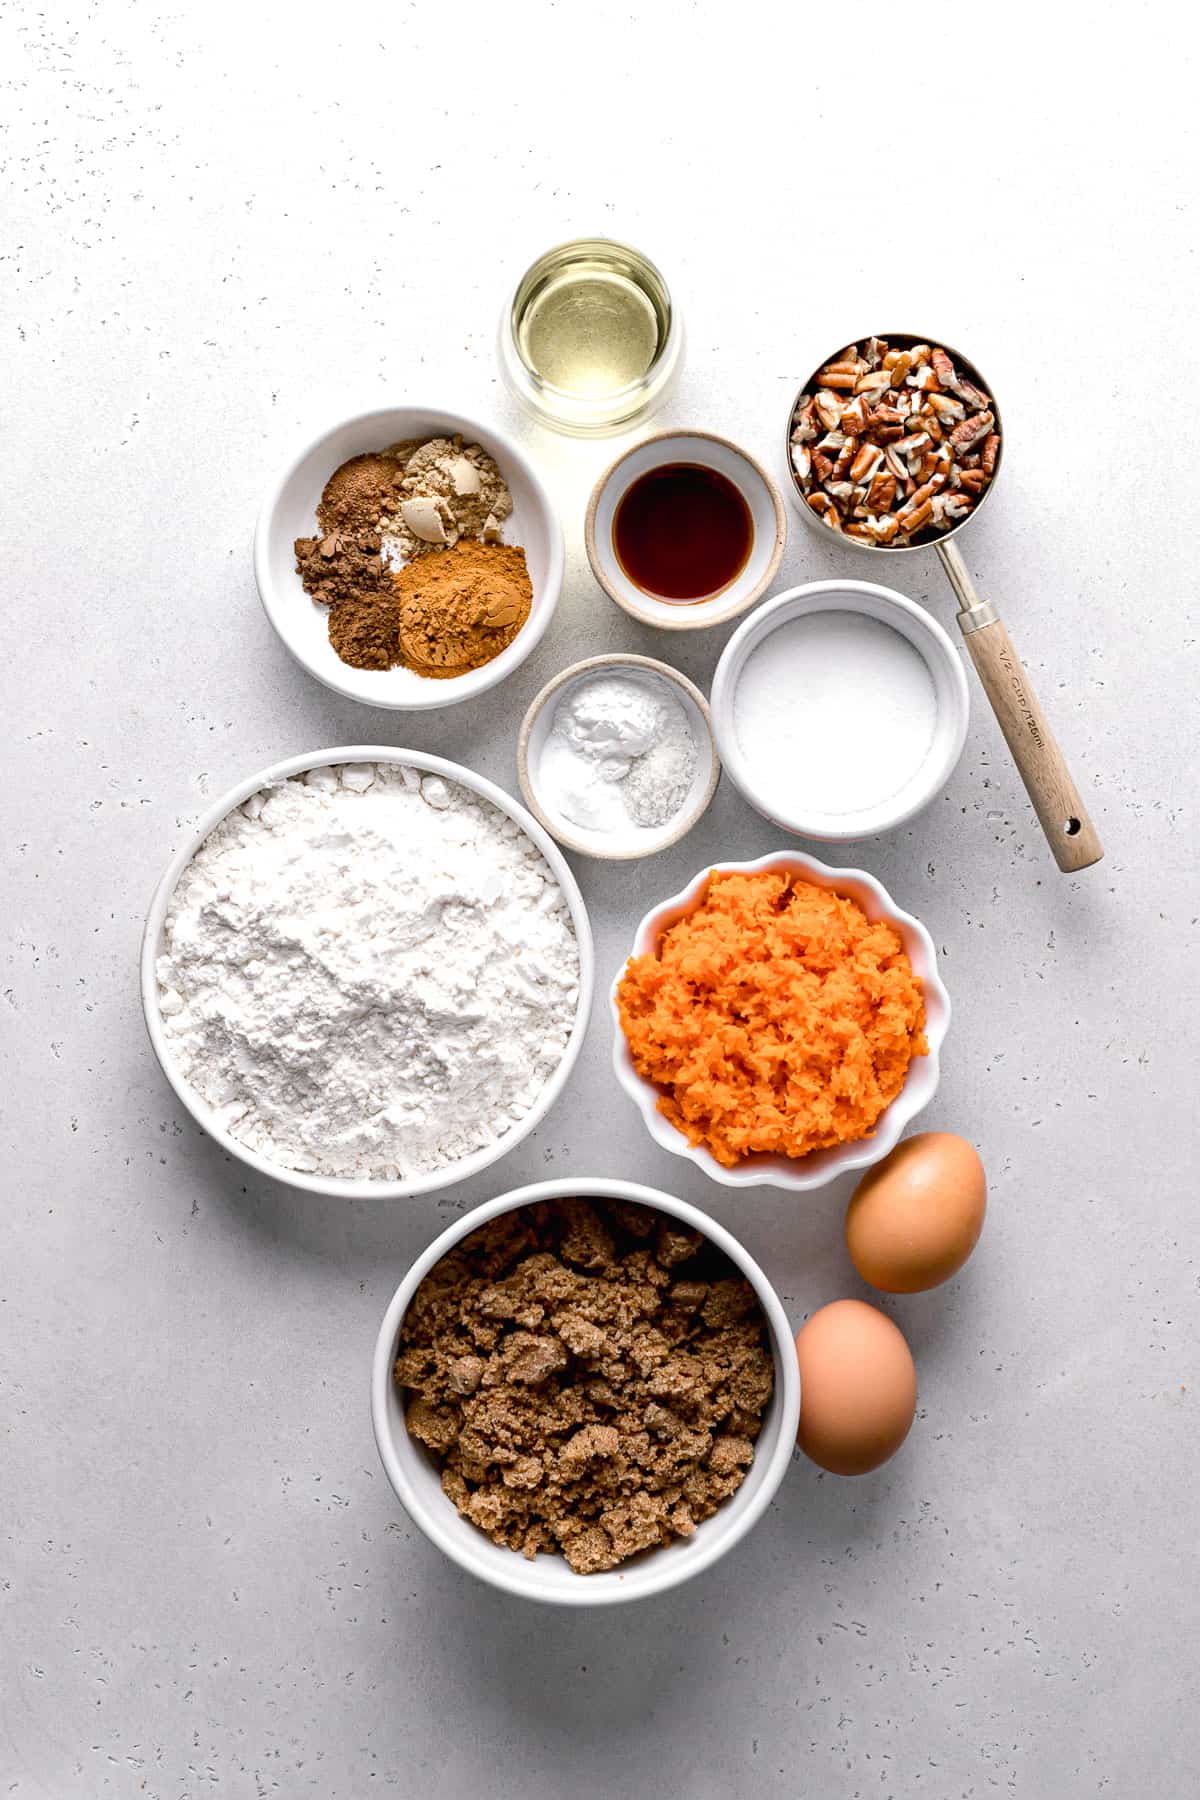 ingredients for small carrot cake recipe.